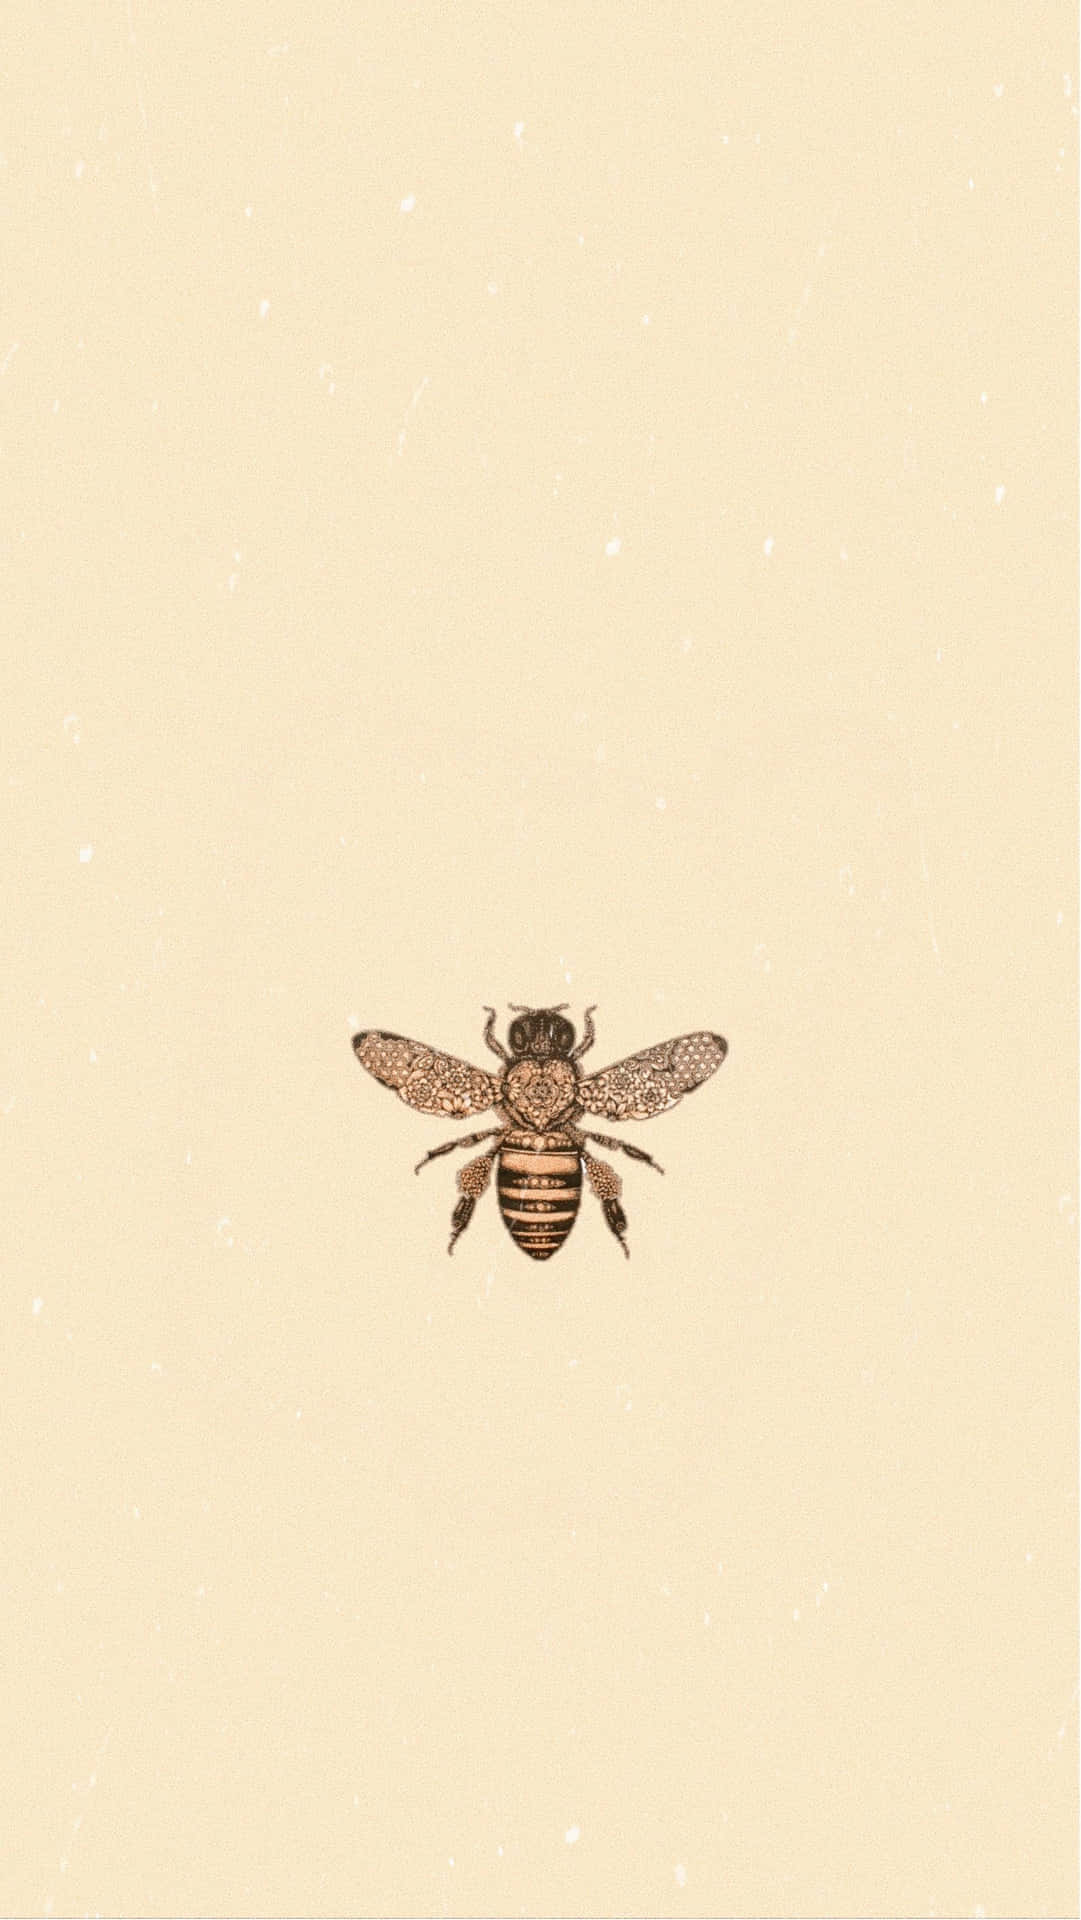 A brown and black bee on a brown background - Bee